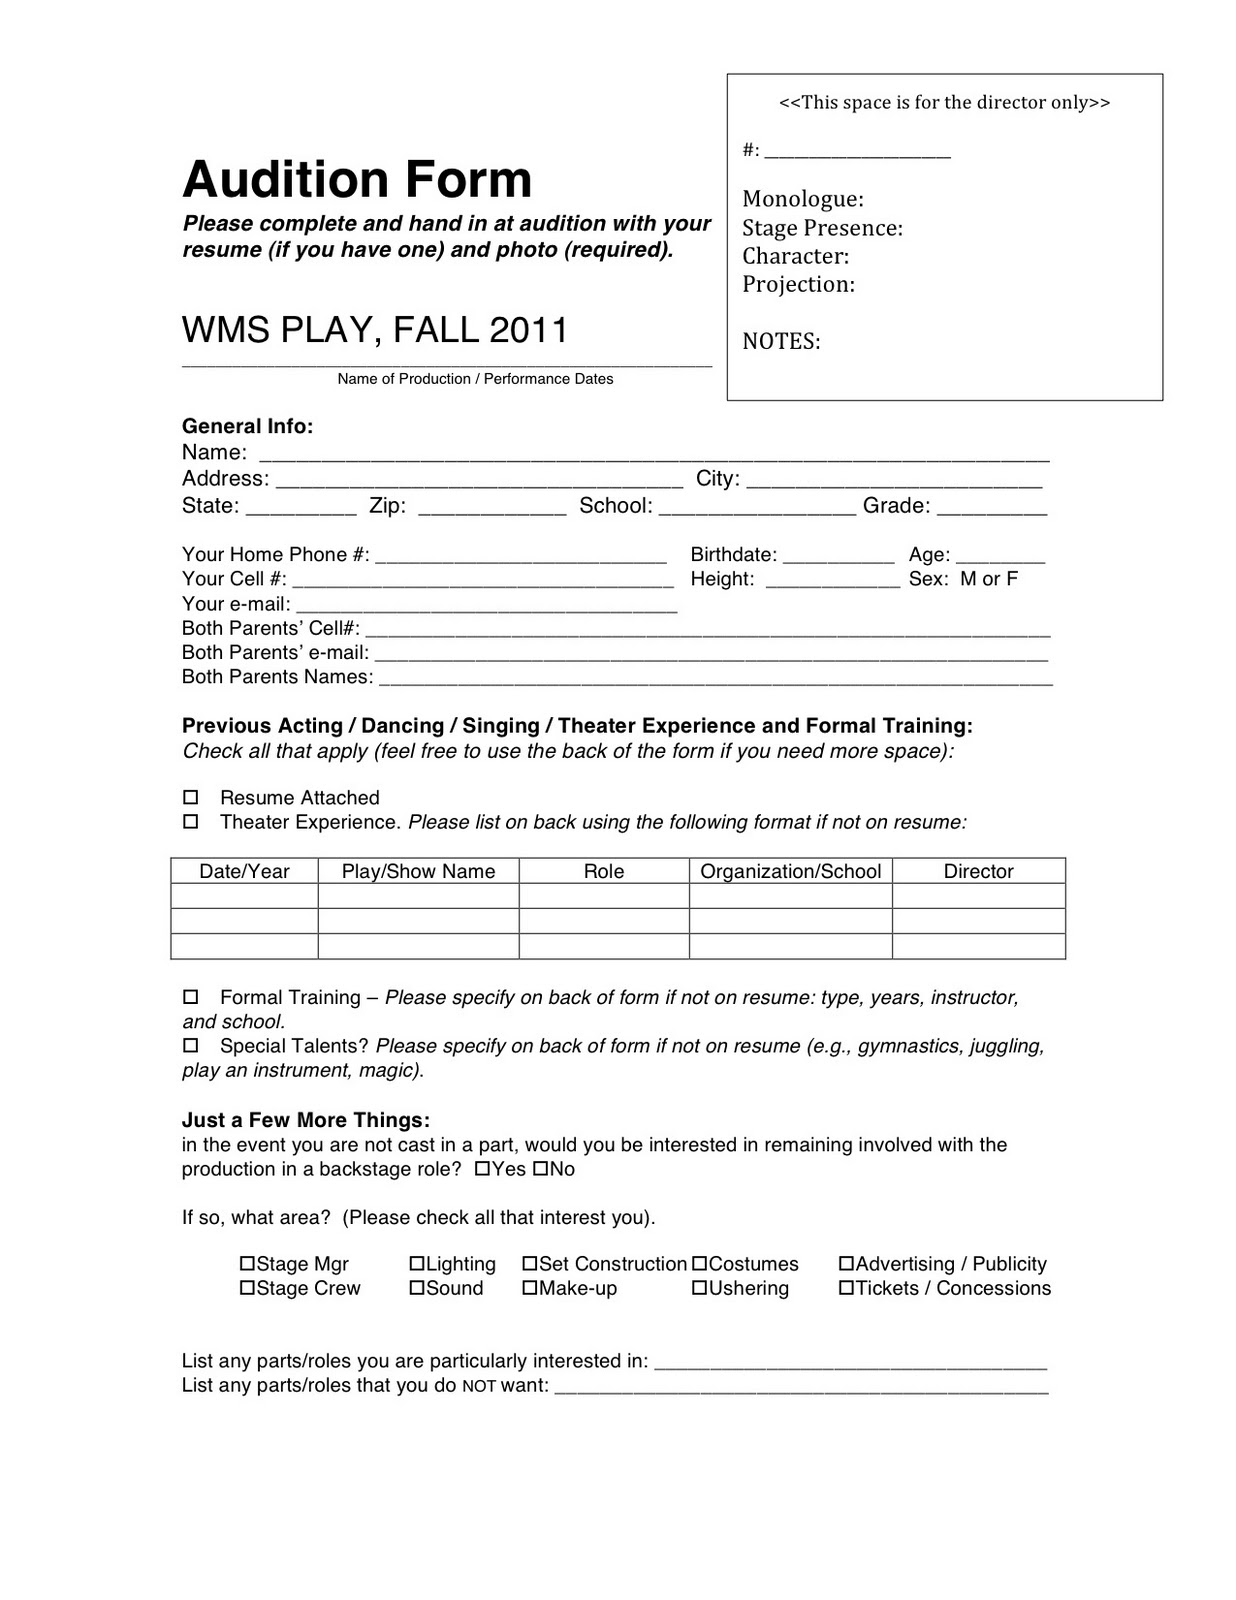 theatre-audition-form-template-the-9-steps-needed-for-ah-studio-blog